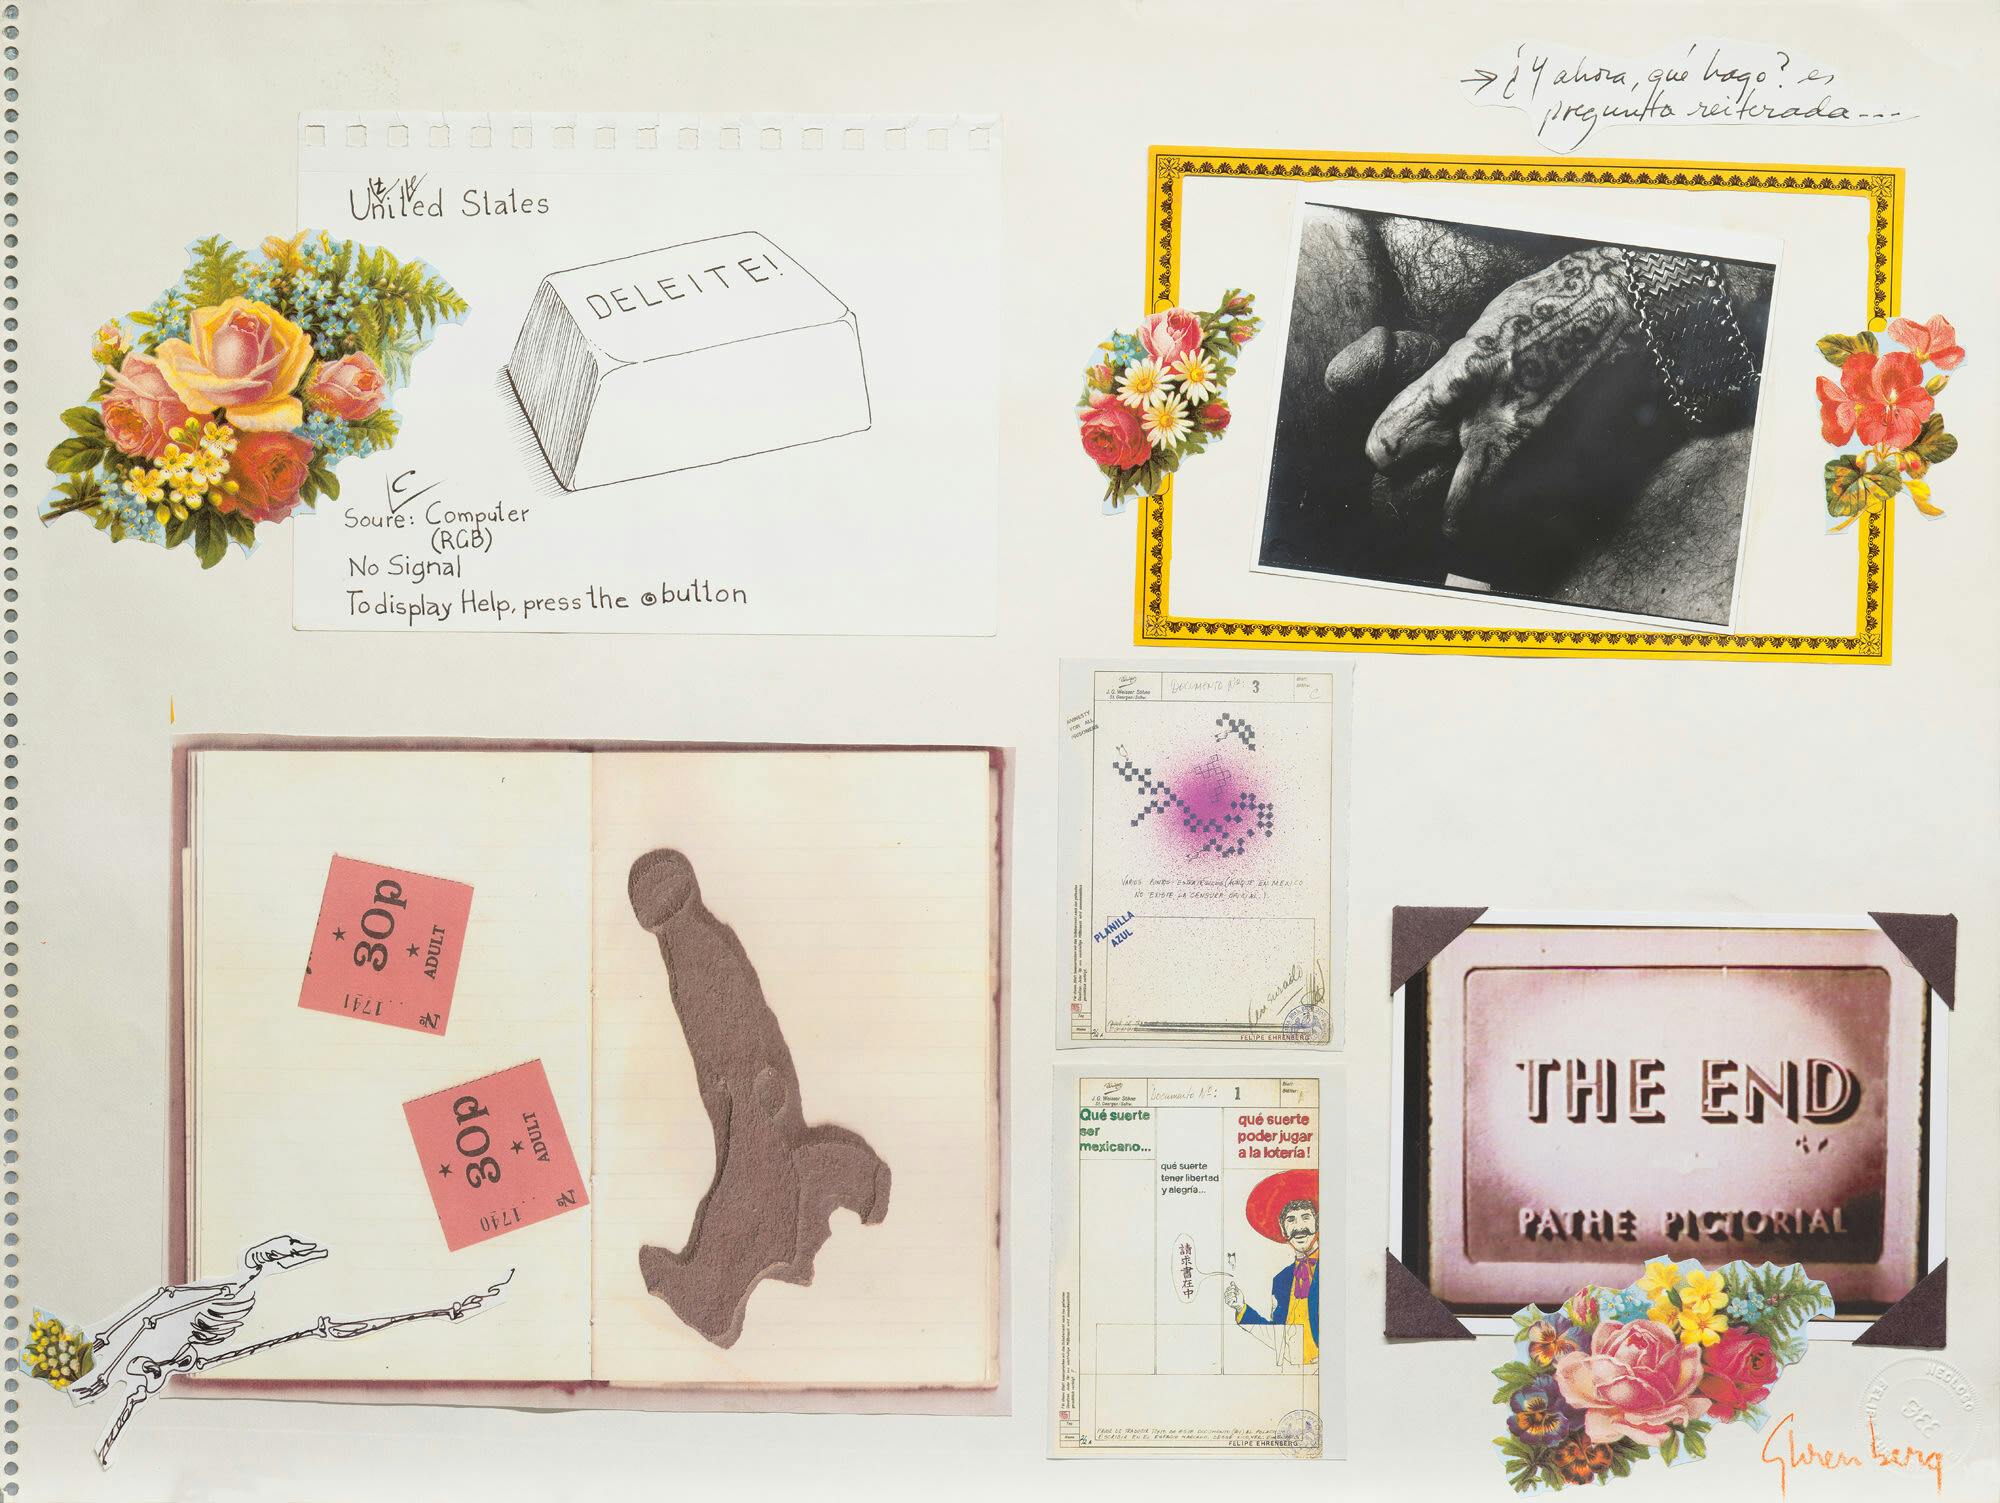 A collage showing photos and drawings, overlaid with floral stickers.